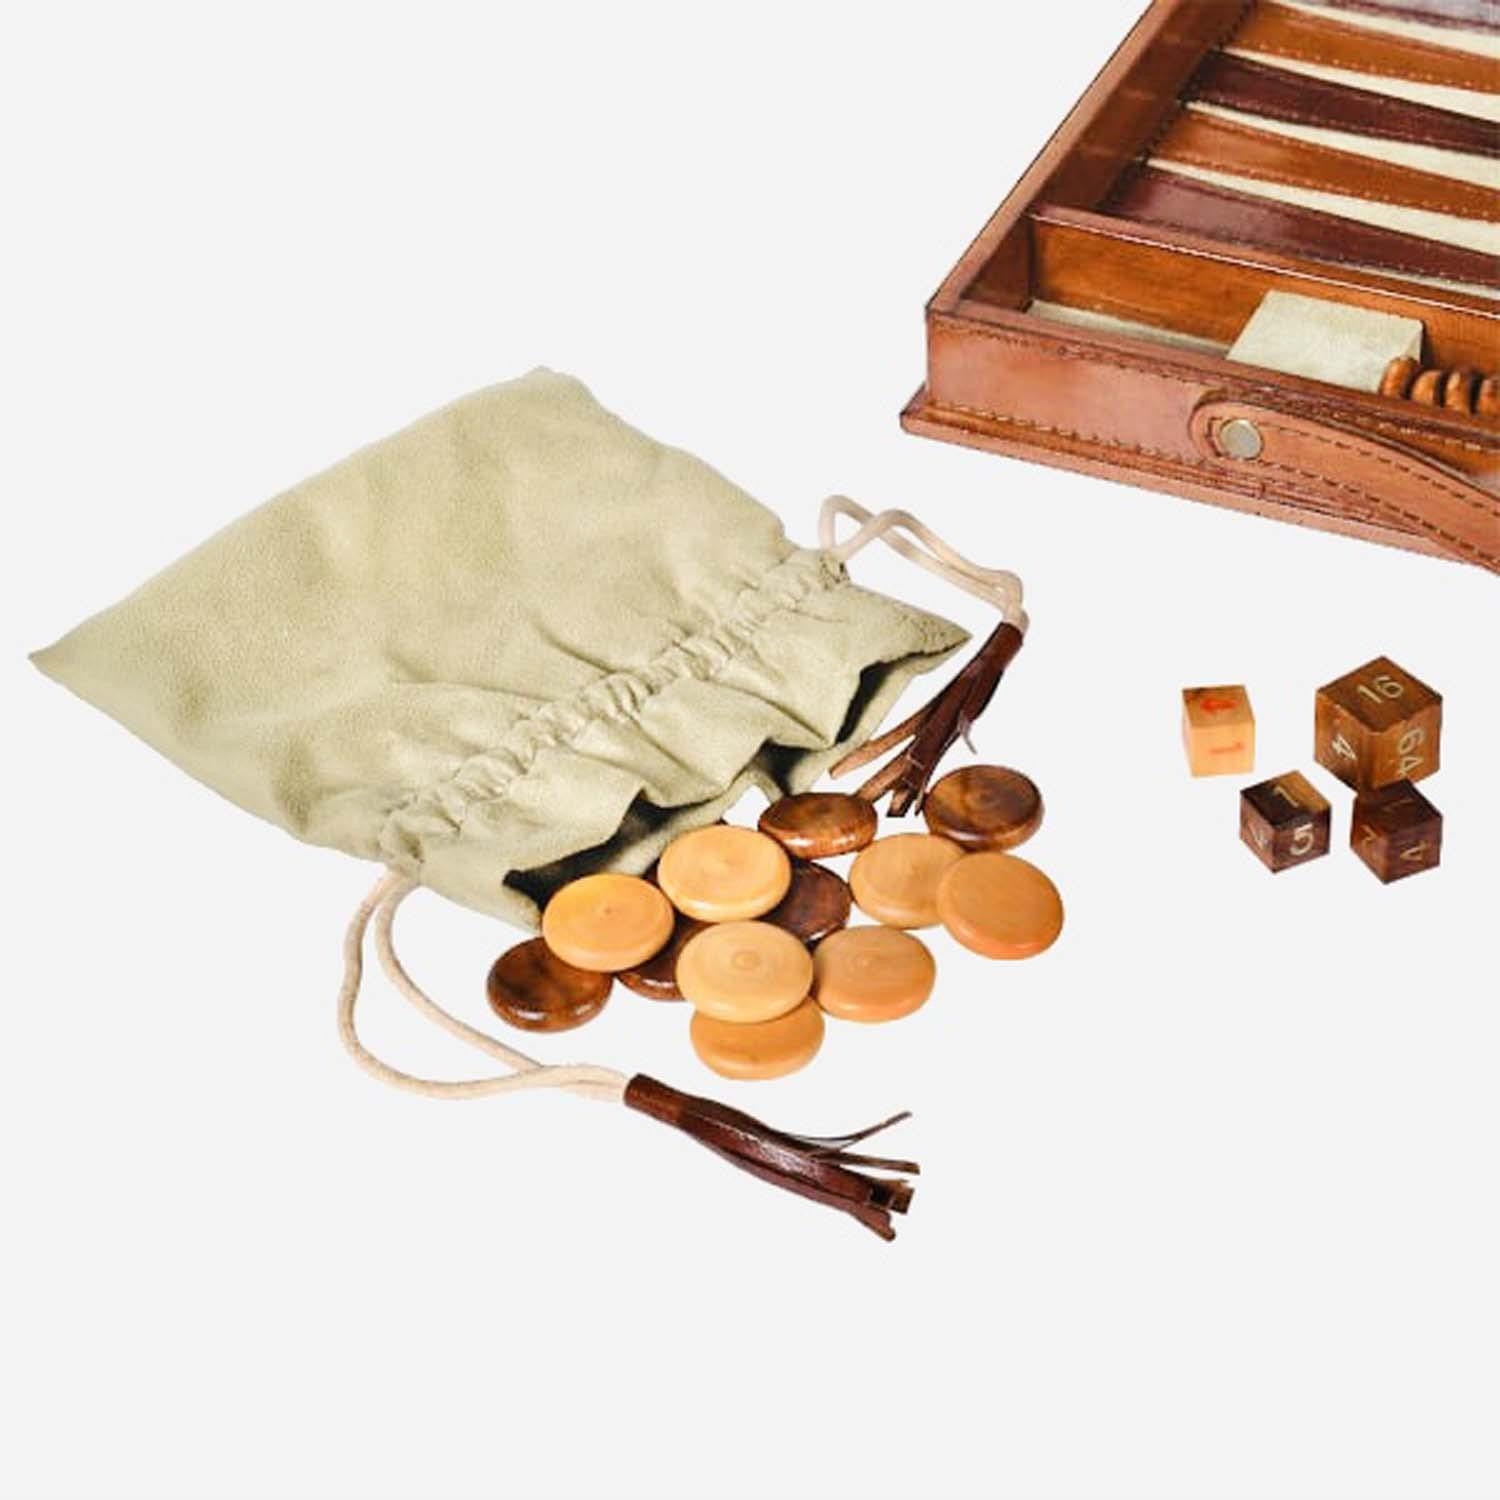 BACKGAMMON SET, in a leathered case, 40cm W x 23cm H x 7cm D. - Image 2 of 3